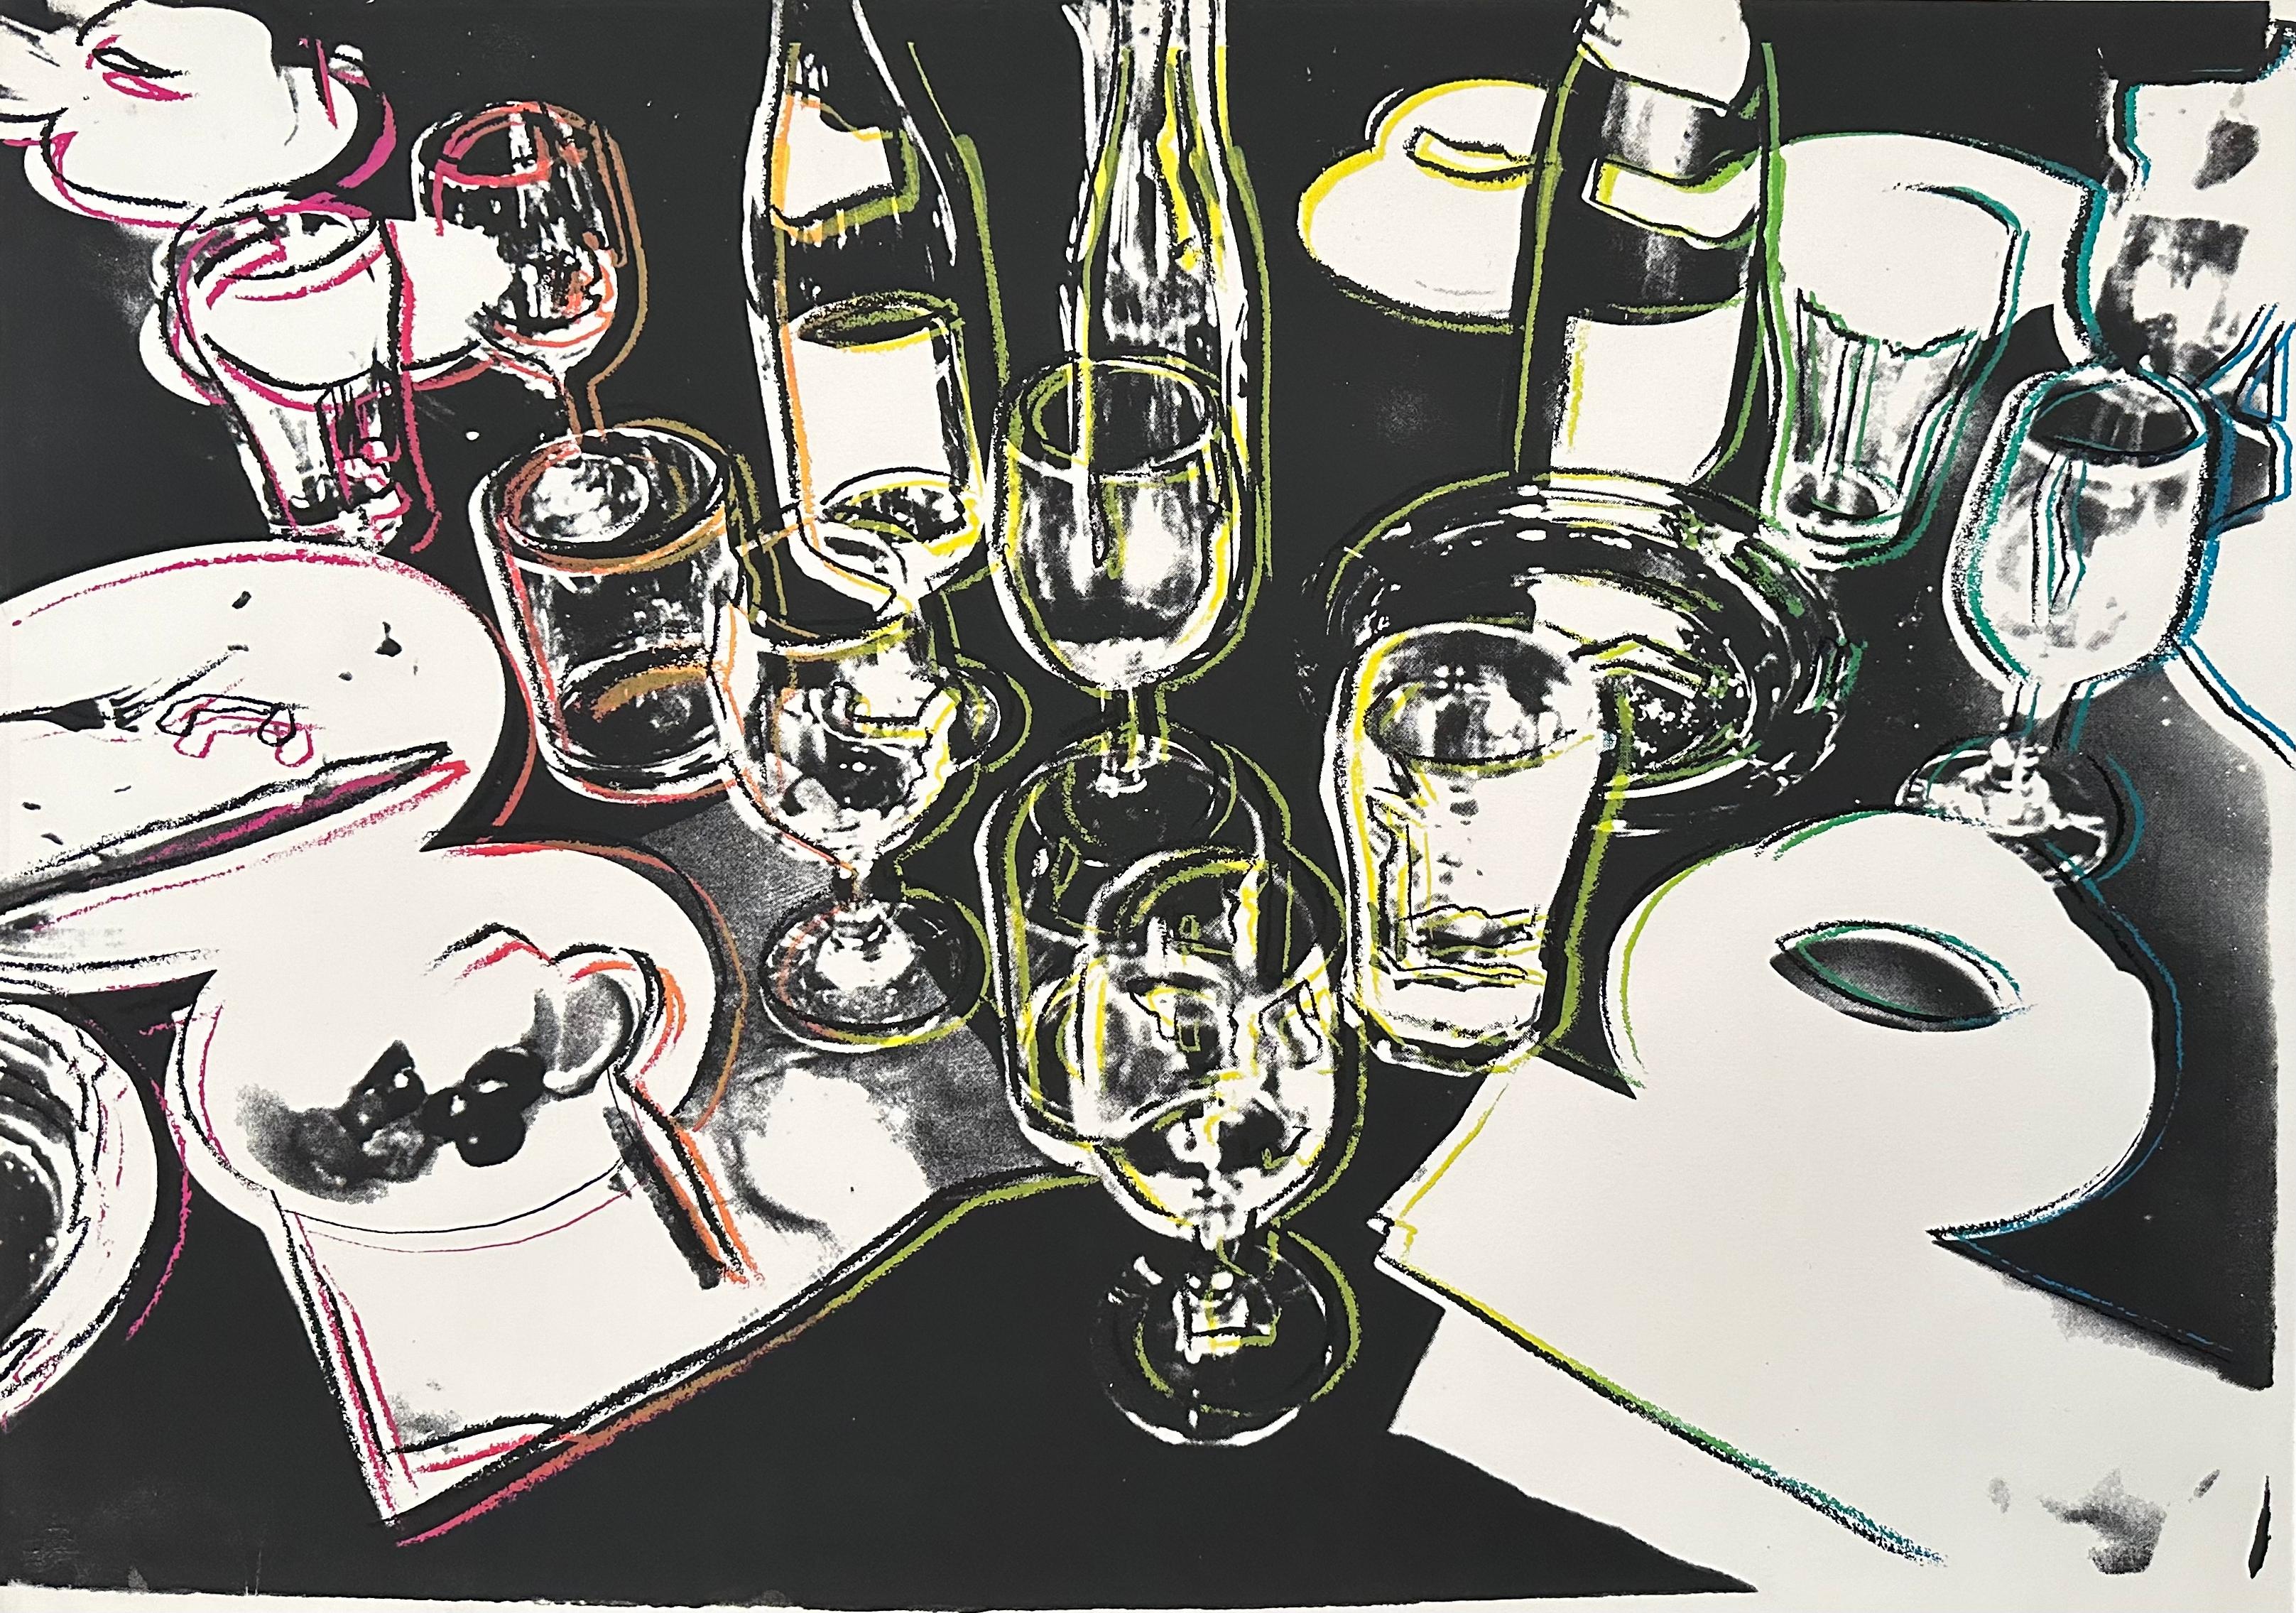 Andy Warhol Still-Life Print - After the Party (F. S. II.183)